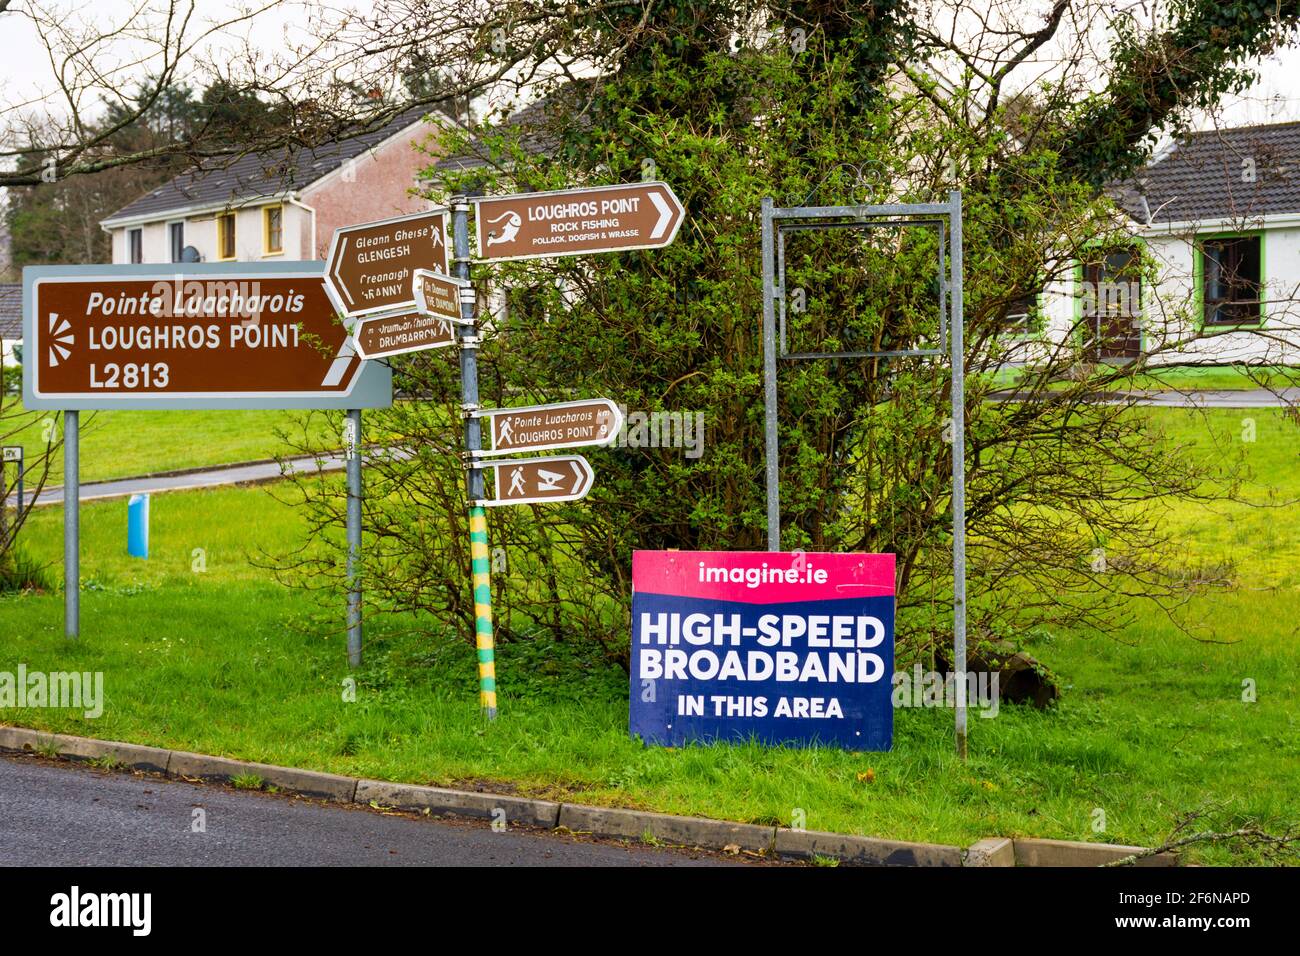 Signage for Imagine.ie, High Speed Broadband in this area. Rural connectivity in Ireland. Stock Photo